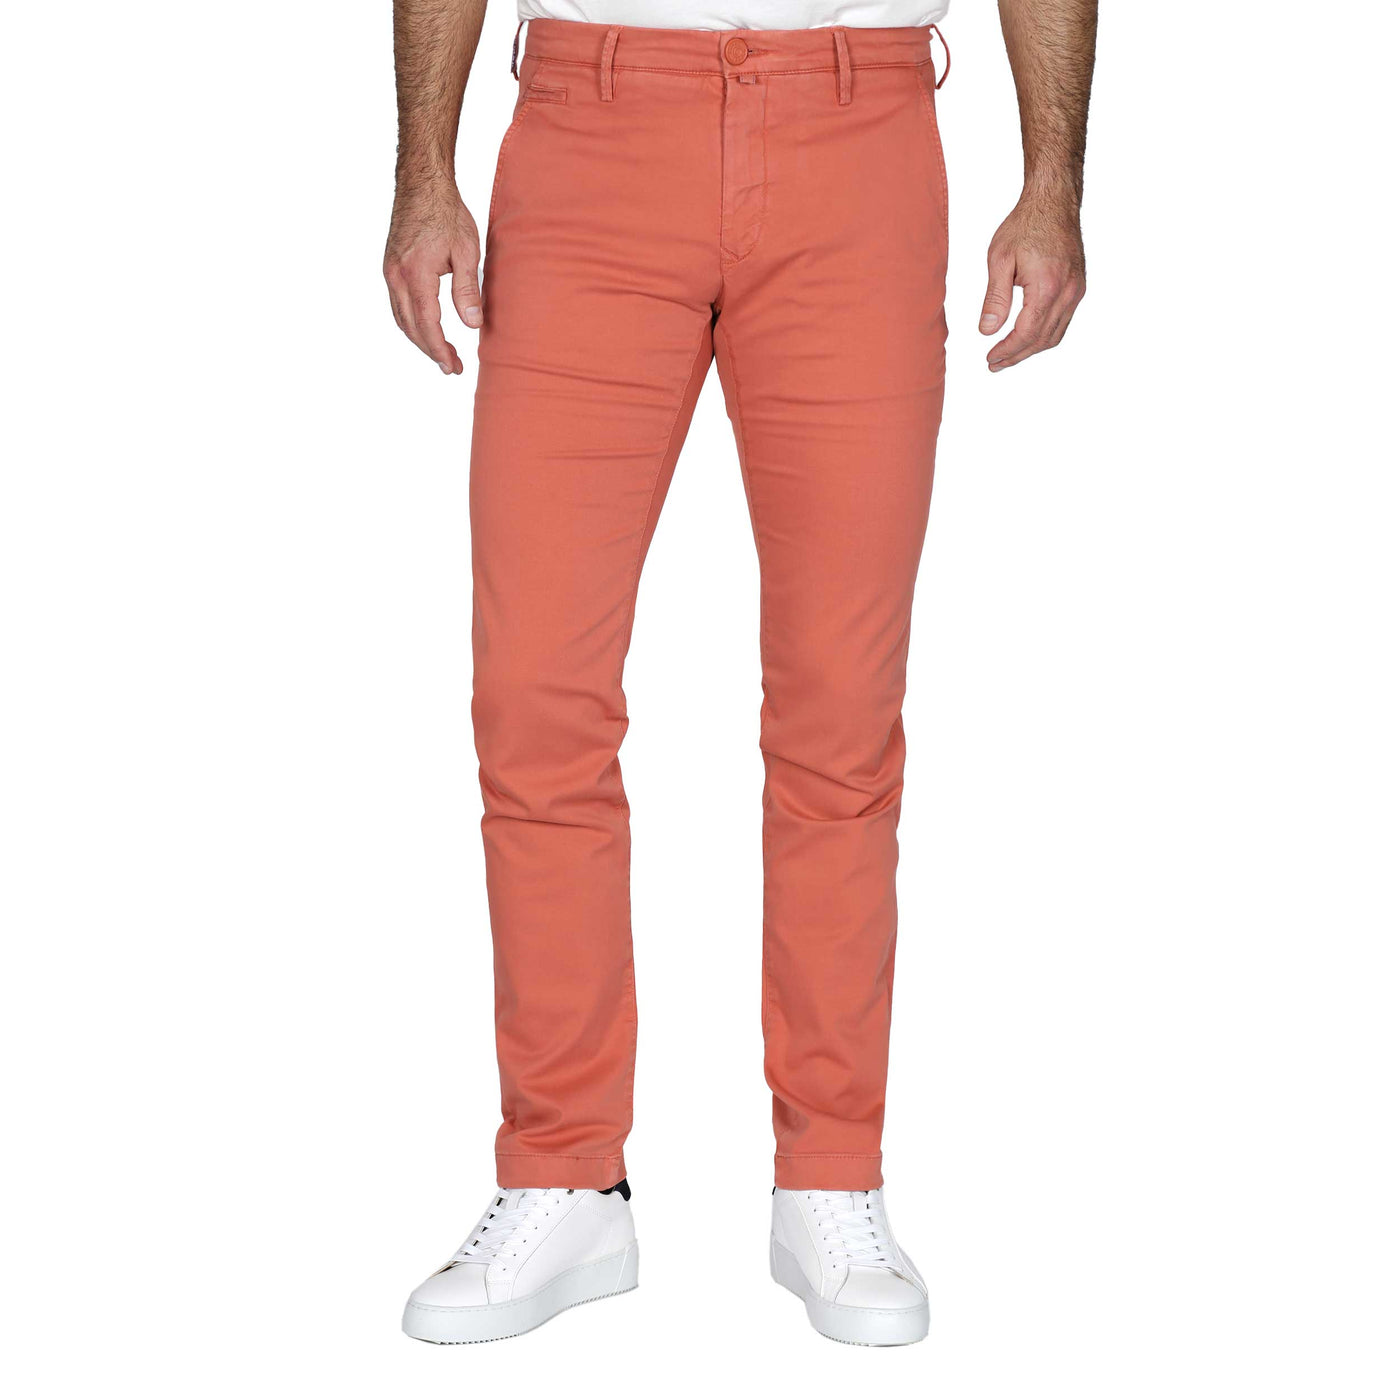 Jacob Cohen Bobby Chino in Salmon Pink